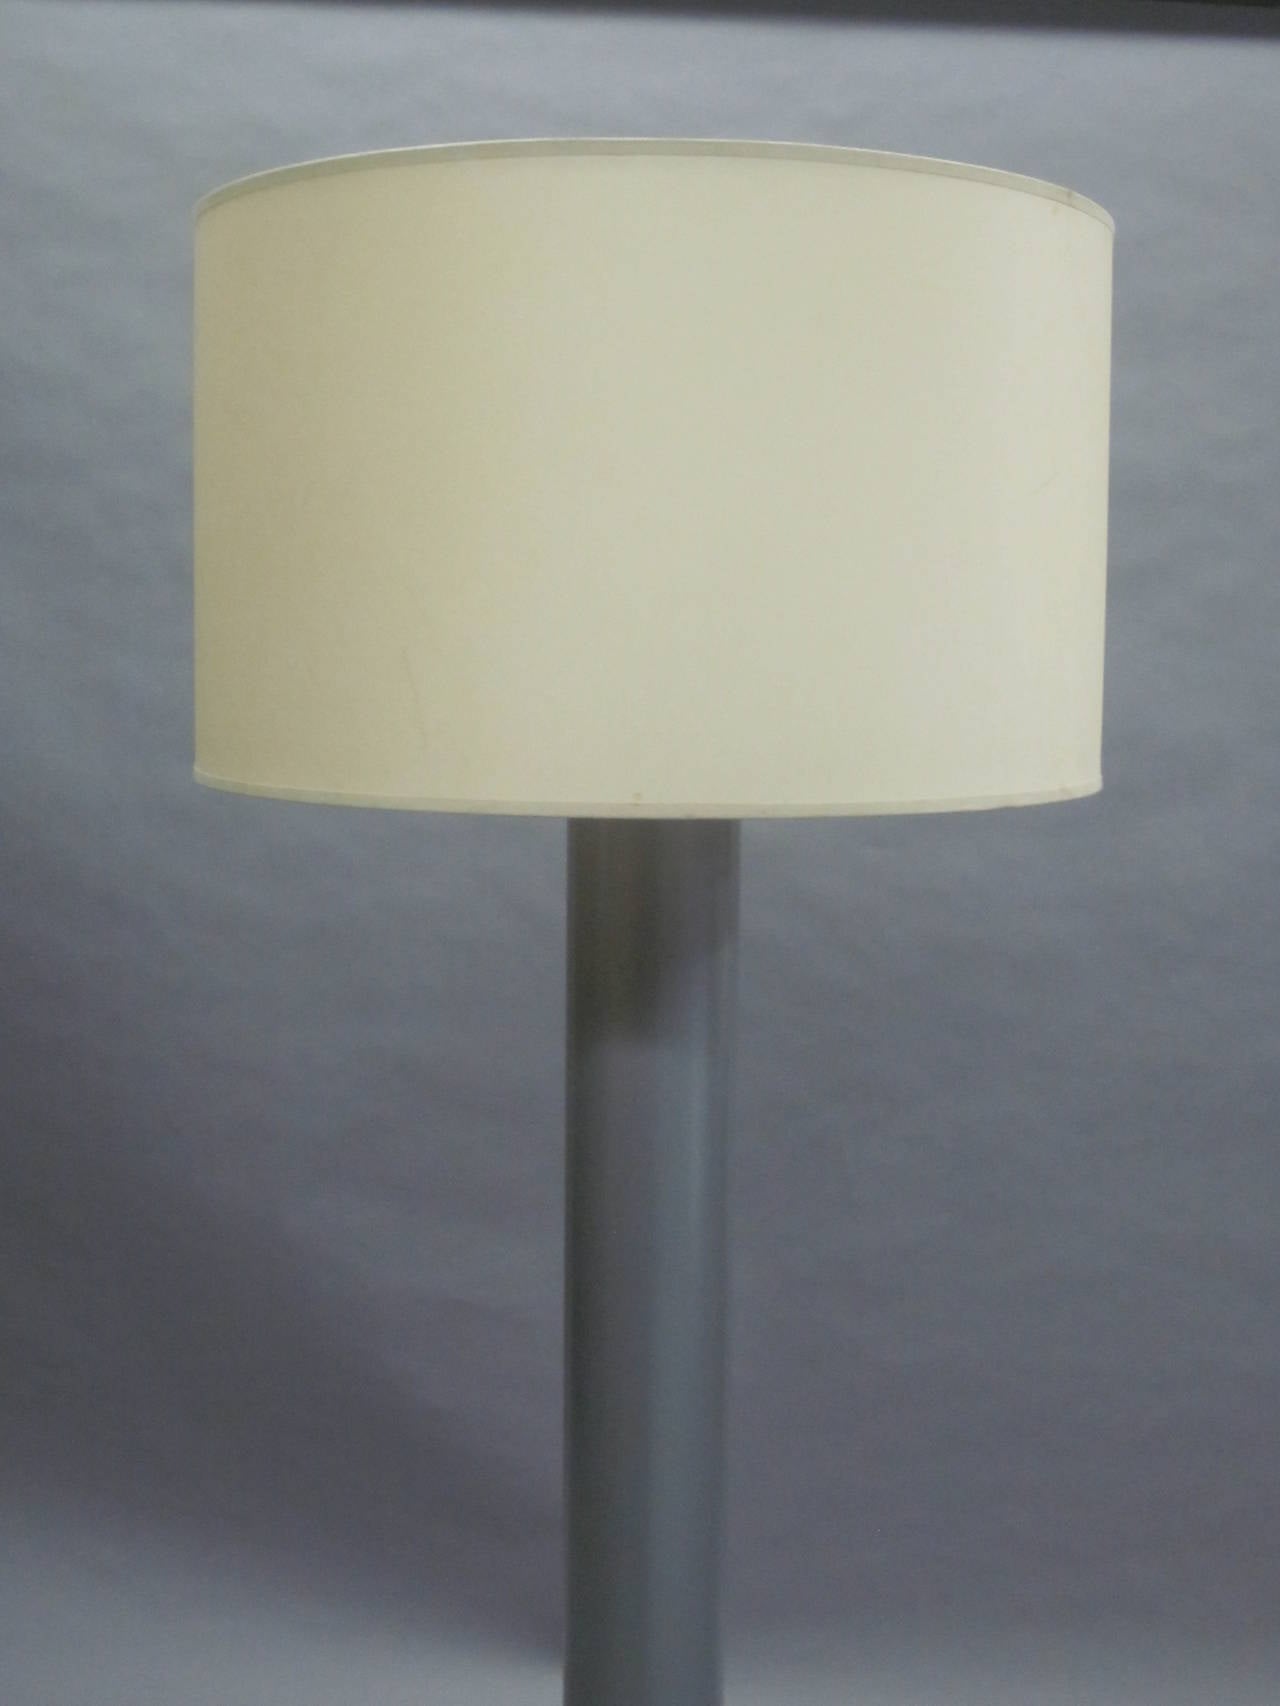 Late 20th Century Pair of French Mid-Century Modern Enameled Steel Floor Lamps, 1970 For Sale